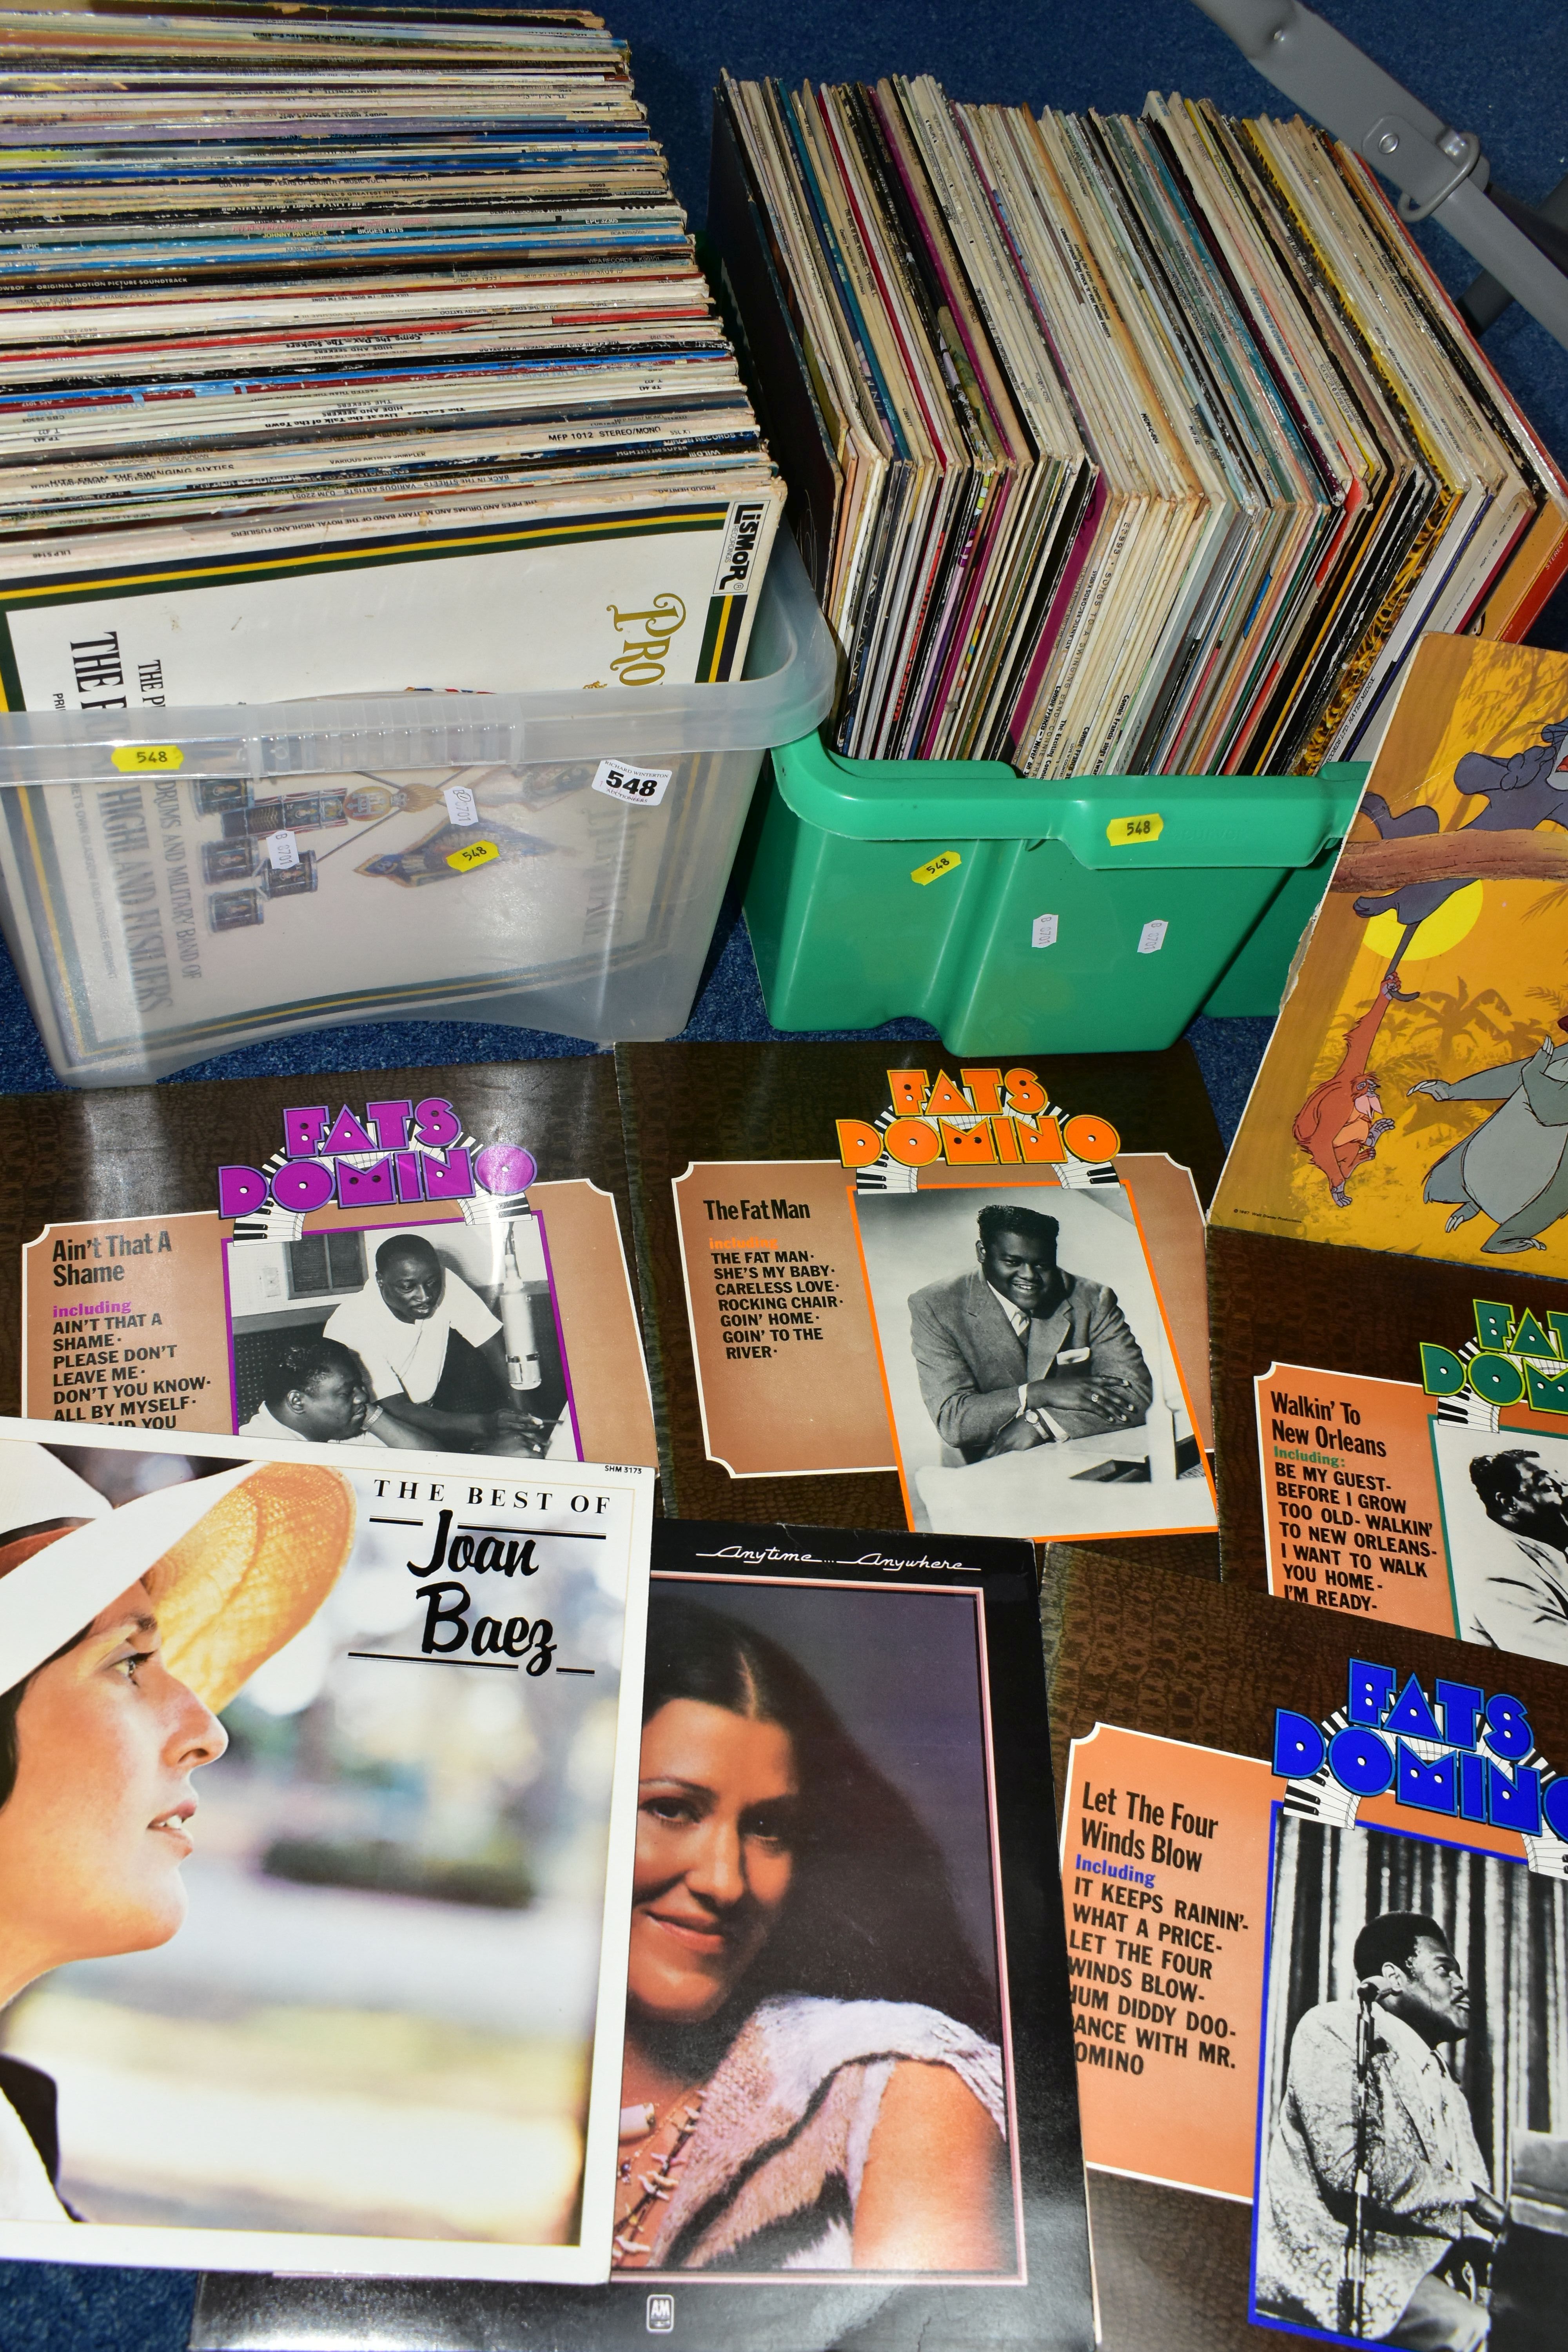 TWO BOXES OF MISCELLANEOUS RECORDS to include Country, Jazz, Folk, Blues, Pop, etc (2 boxes)